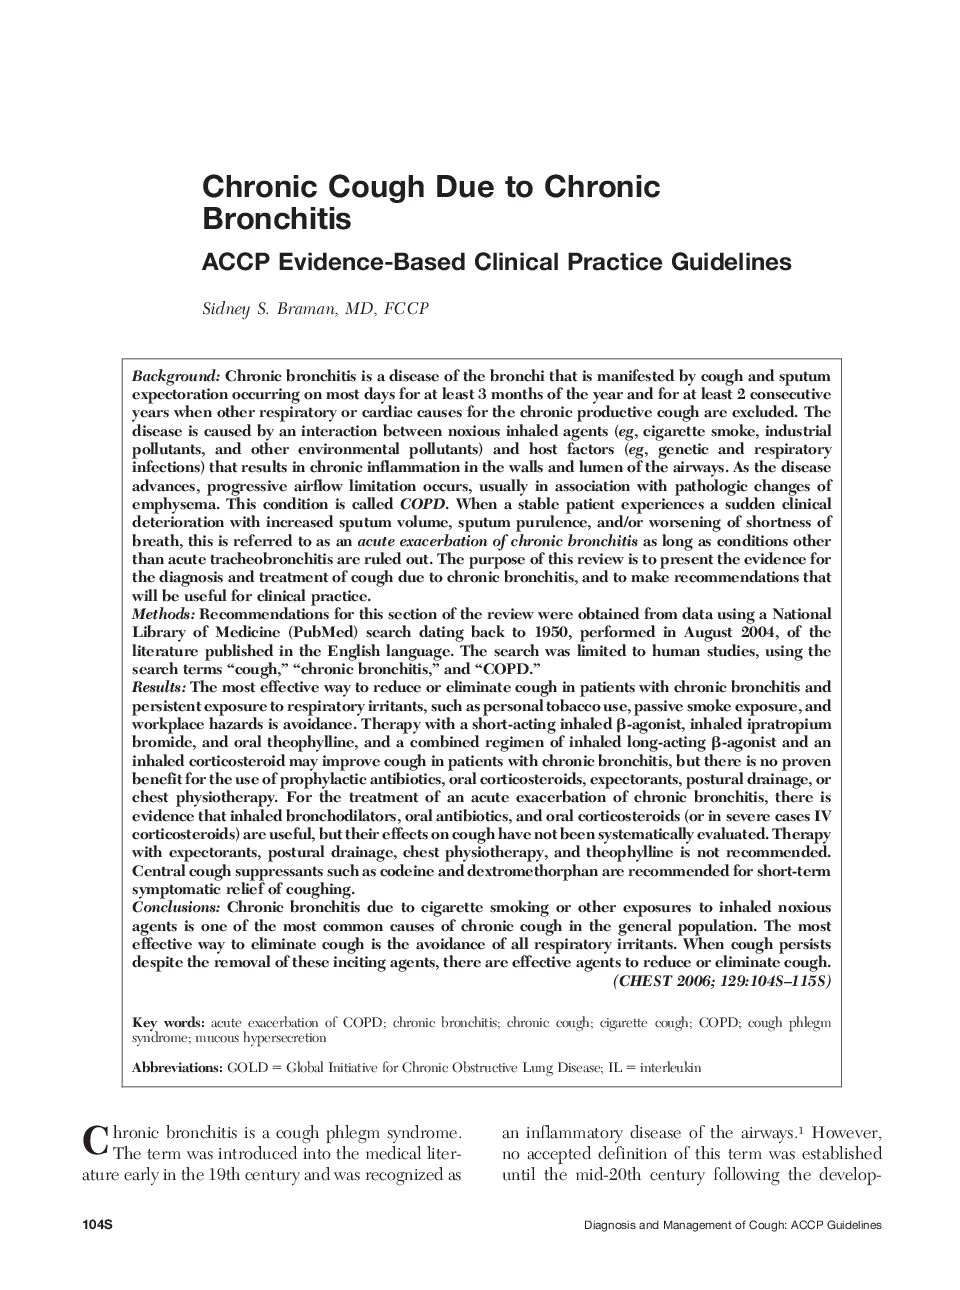 Chronic Cough Due to Chronic Bronchitis : ACCP Evidence-Based Clinical Practice Guidelines